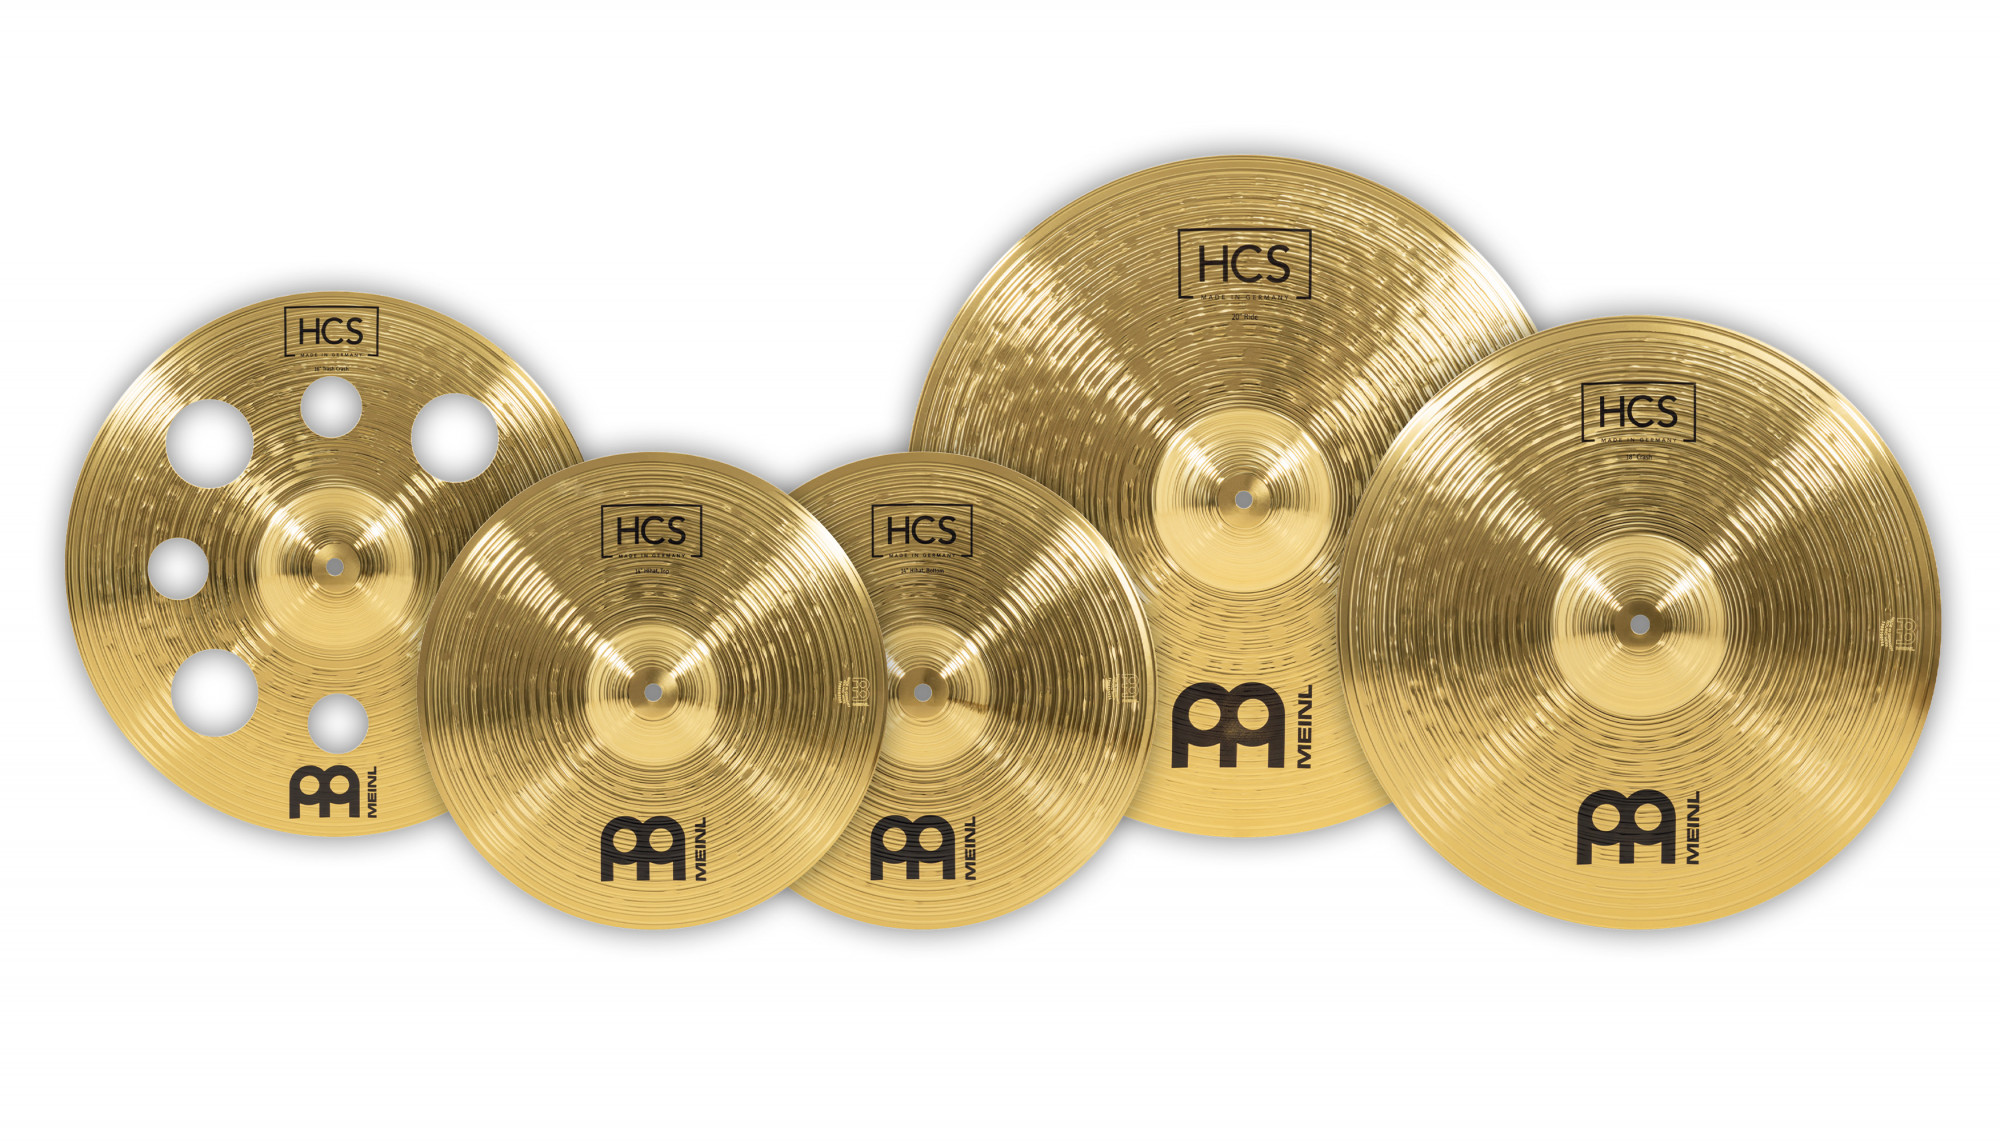 MEINL Cymbals HCS Expanded Cymbal Set - 14